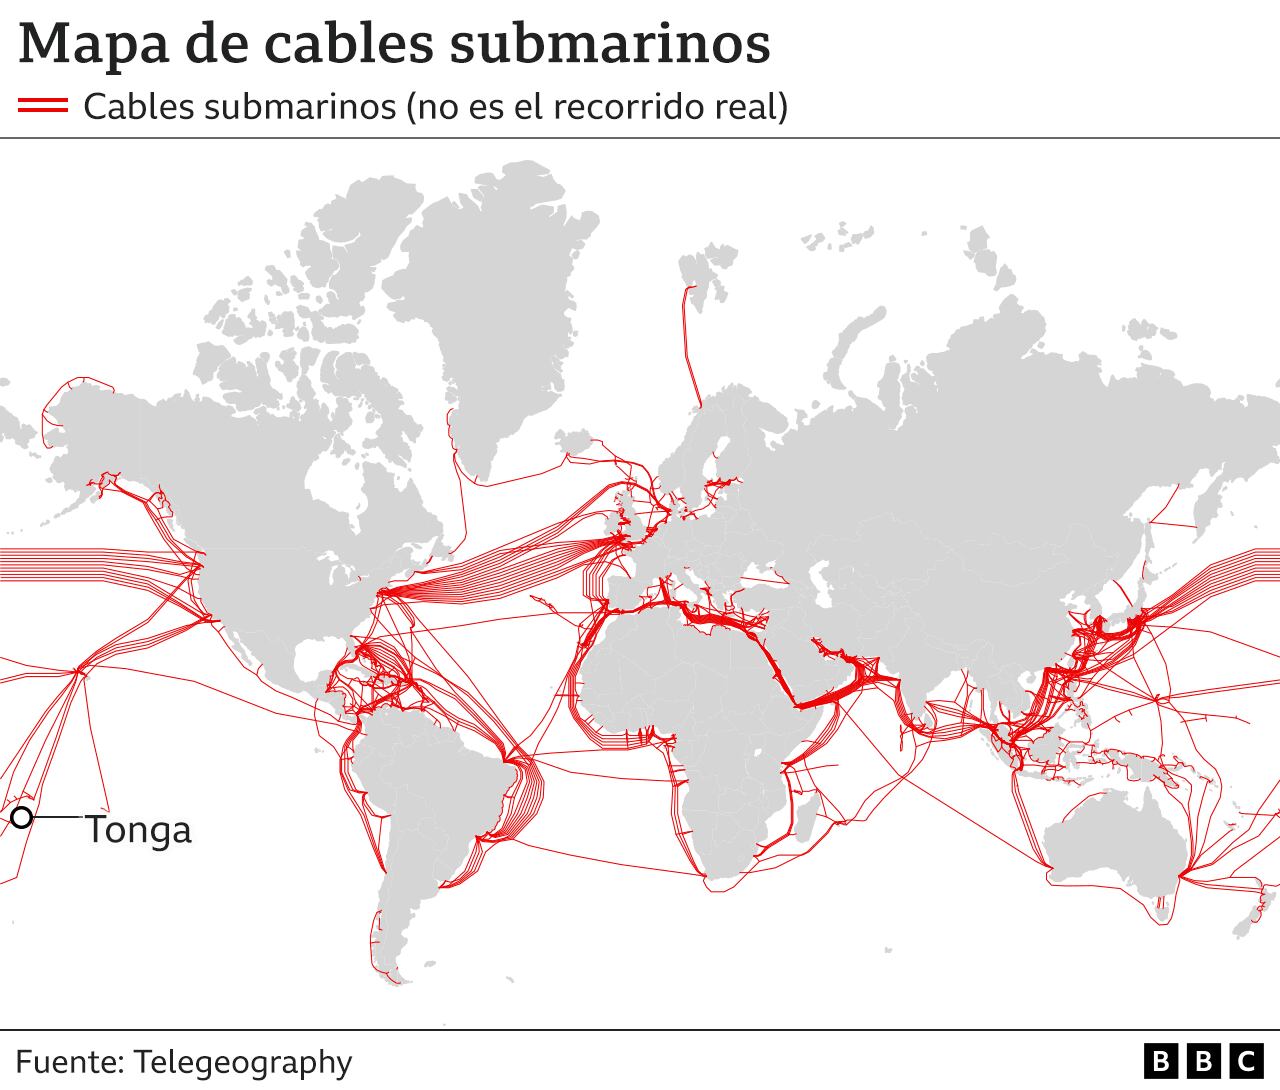 Map with submarine cables of the world